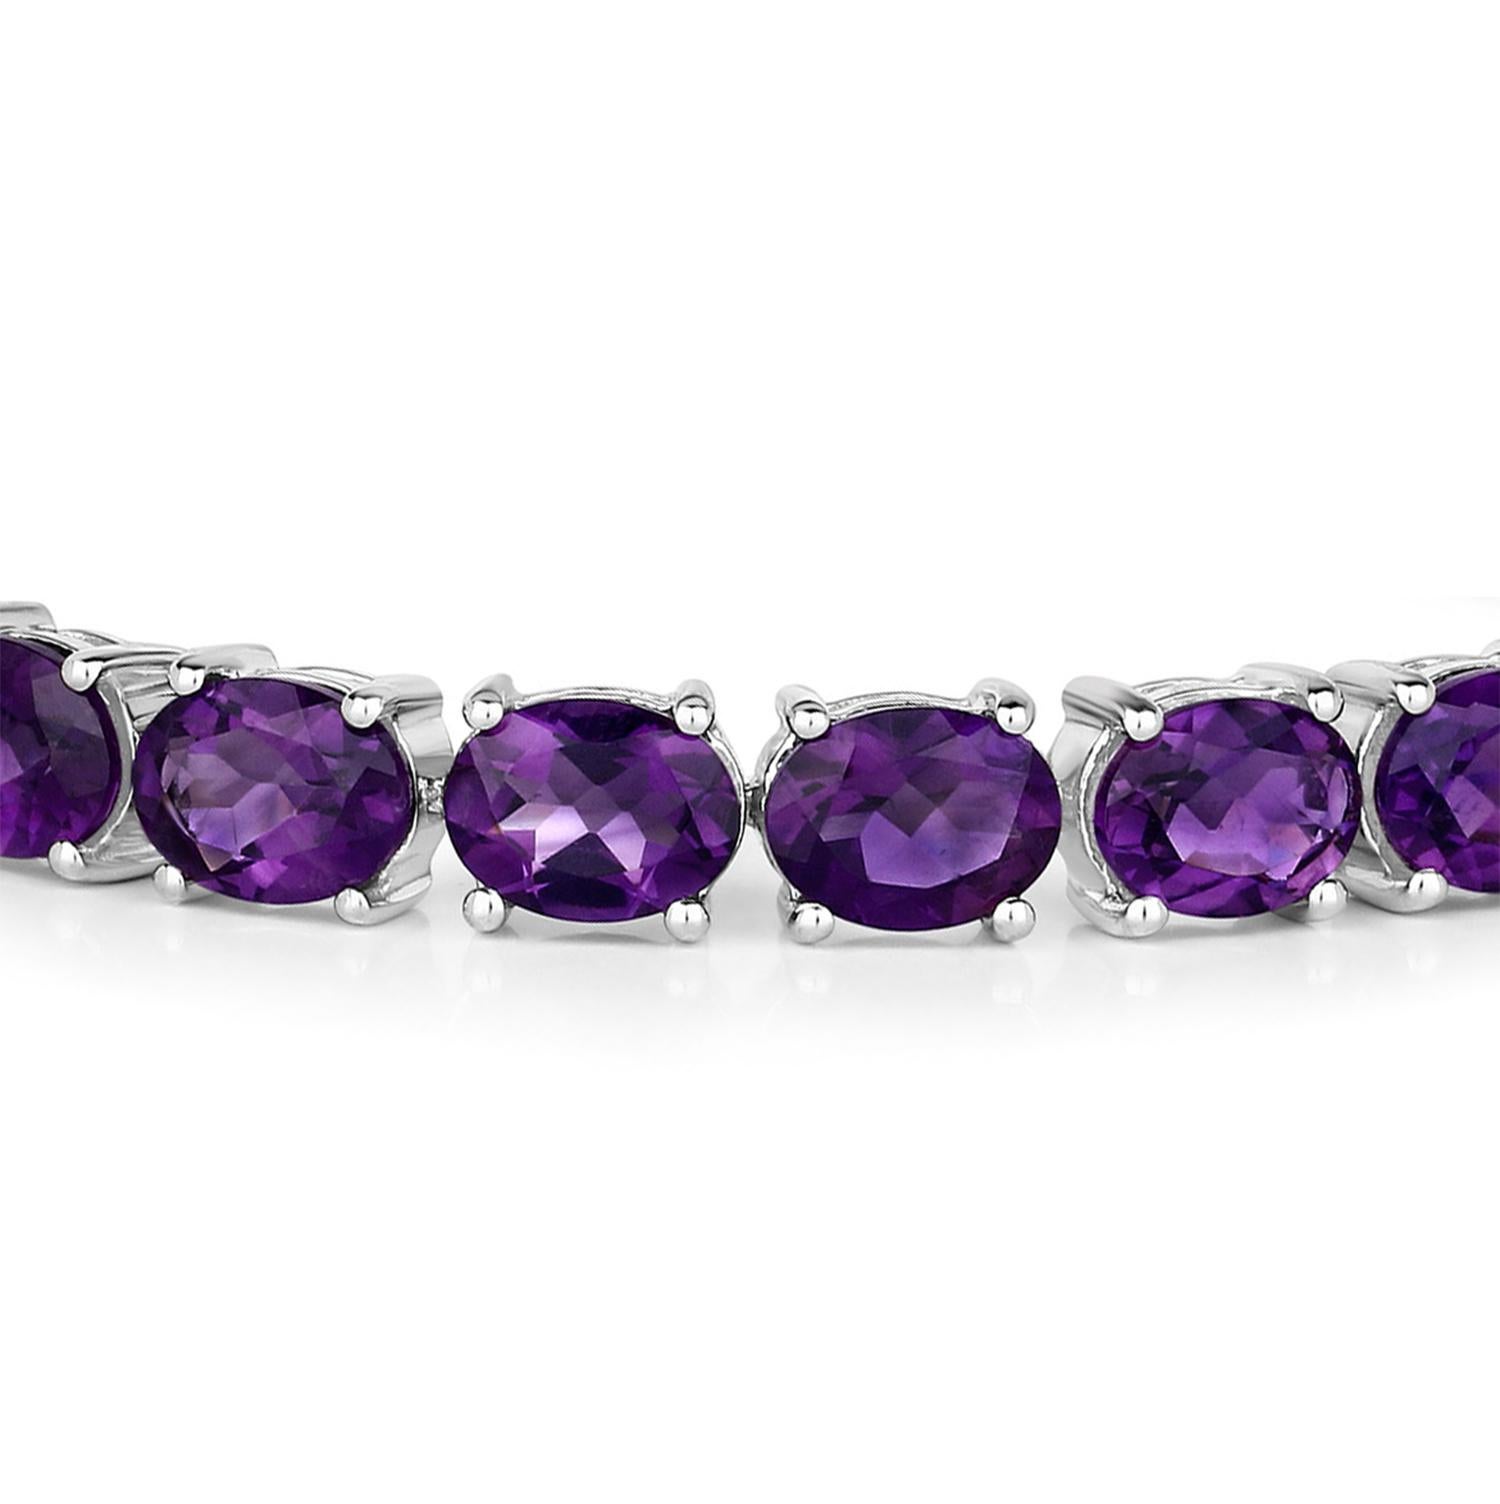 Oval Cut Amethyst Tennis Bracelet 23.10 Carats Rhodium Plated Sterling Silver For Sale